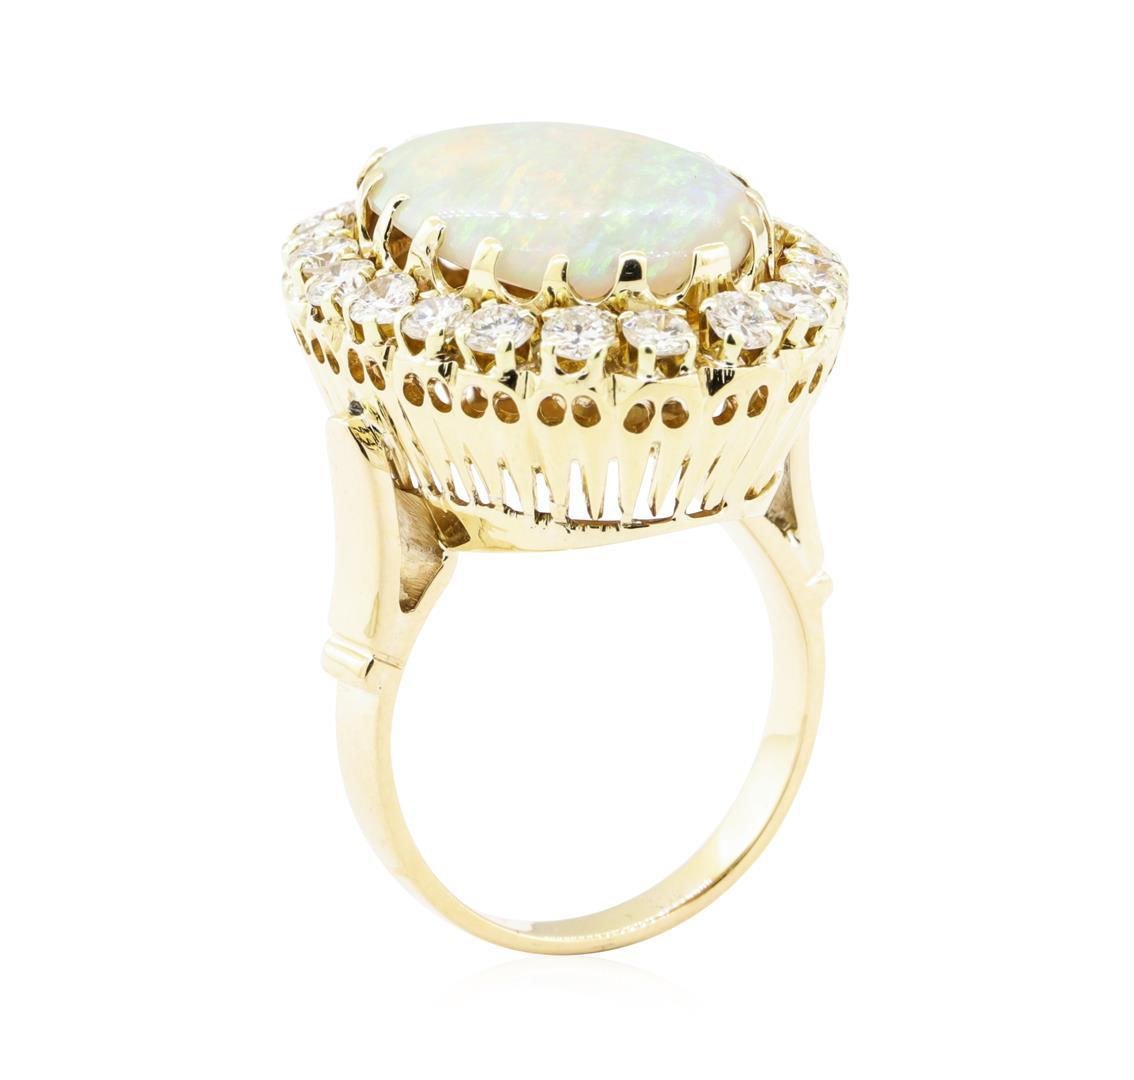 7.90 ctw Opal And Diamond Ring - 14KT Yellow Gold